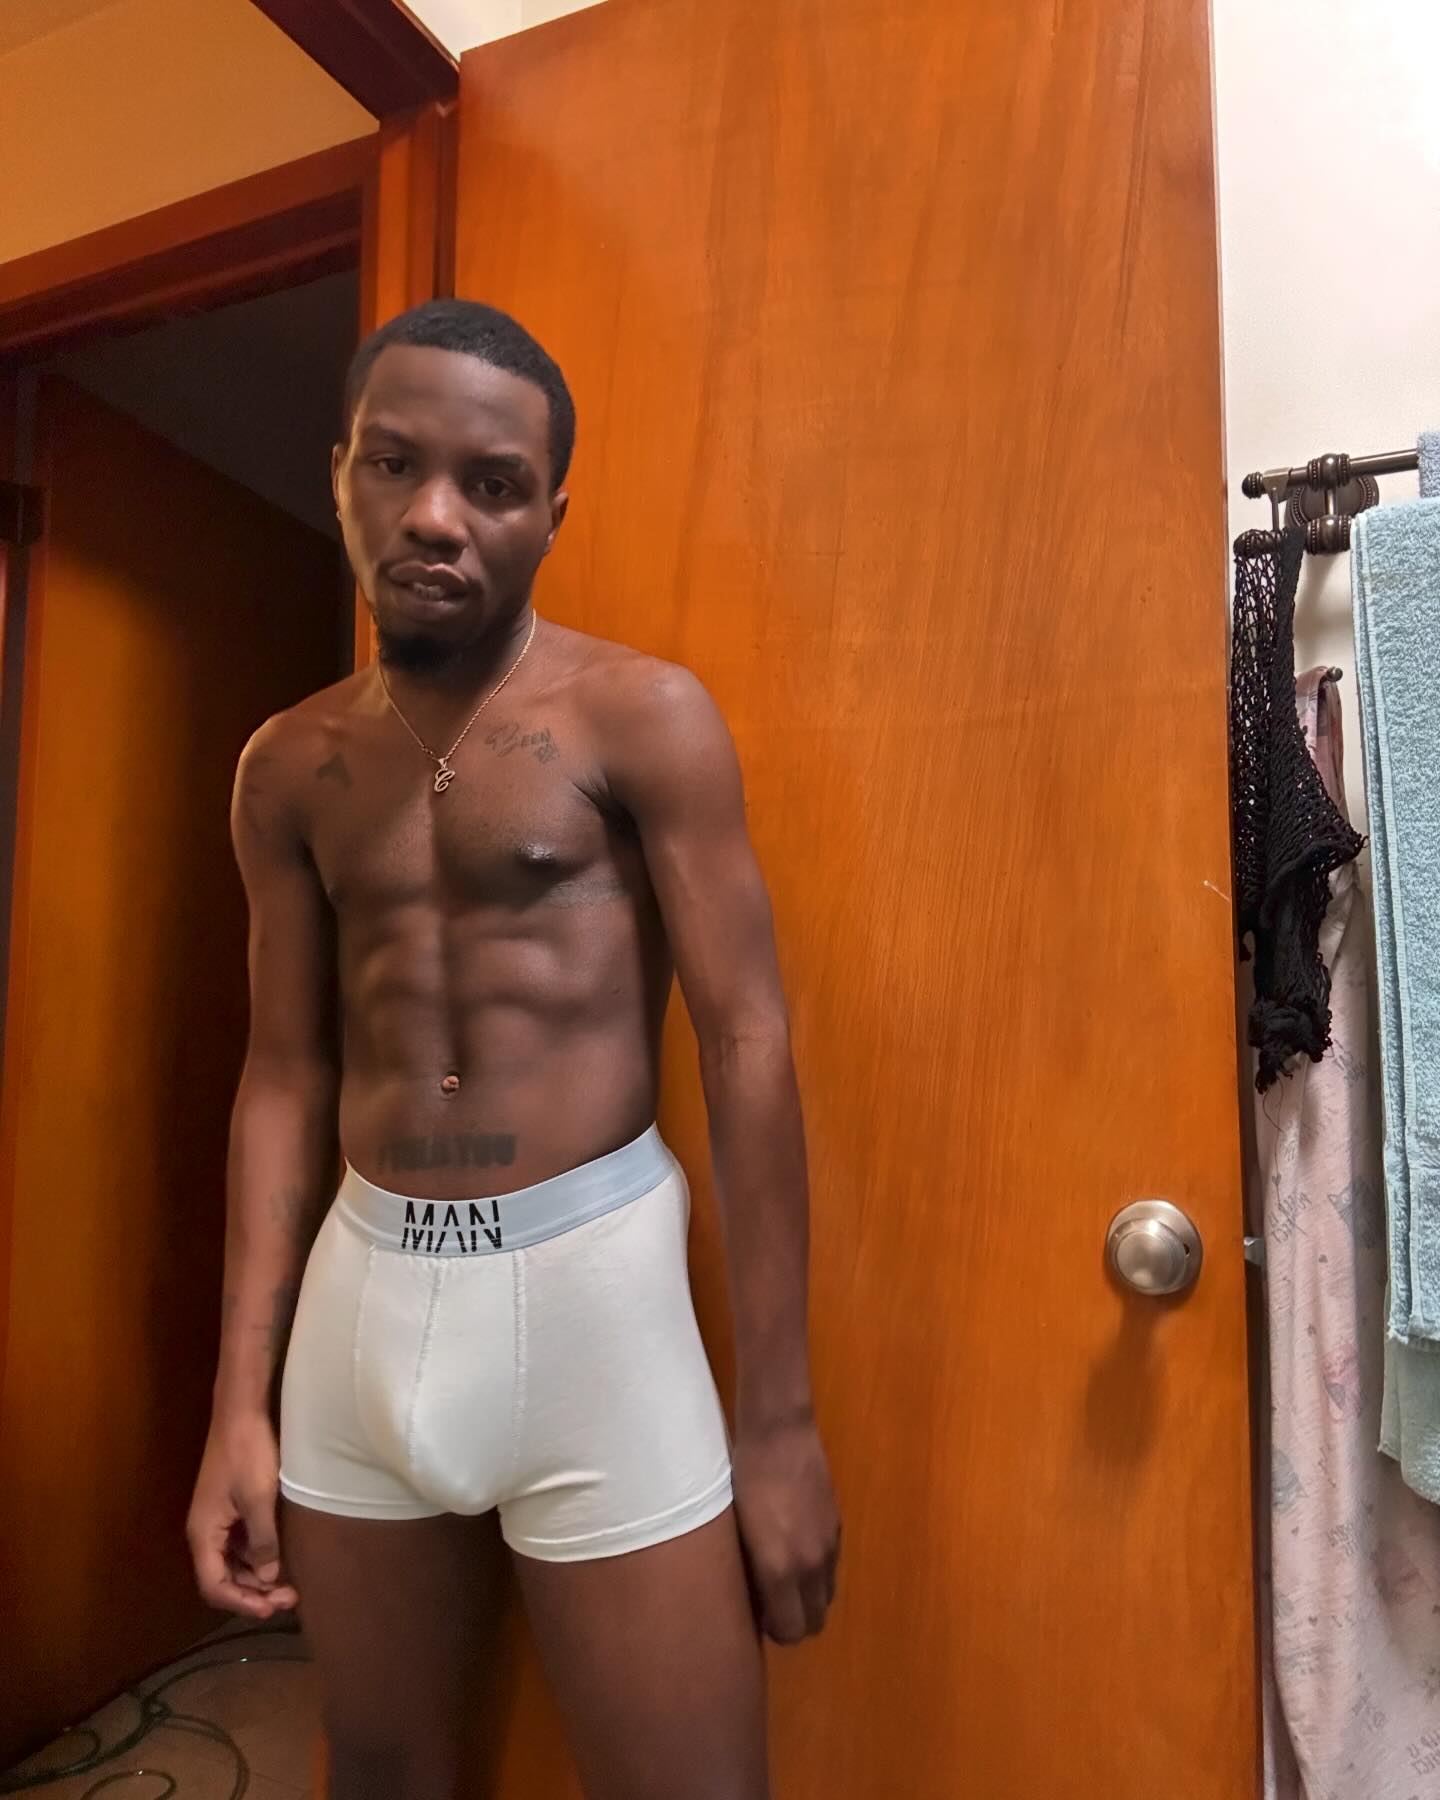 Baby, I just want some head in the mornin’😏

Sex overseas in the sand so it never get borin’ 😩

Show me I’m important🧐

#annmarie #tripolar #tripolar2 #tripolar3  #therapy #onlyfans #chicago #man #manunderwear #rihanna #sza #explore #explorepage✨ #model #chicago